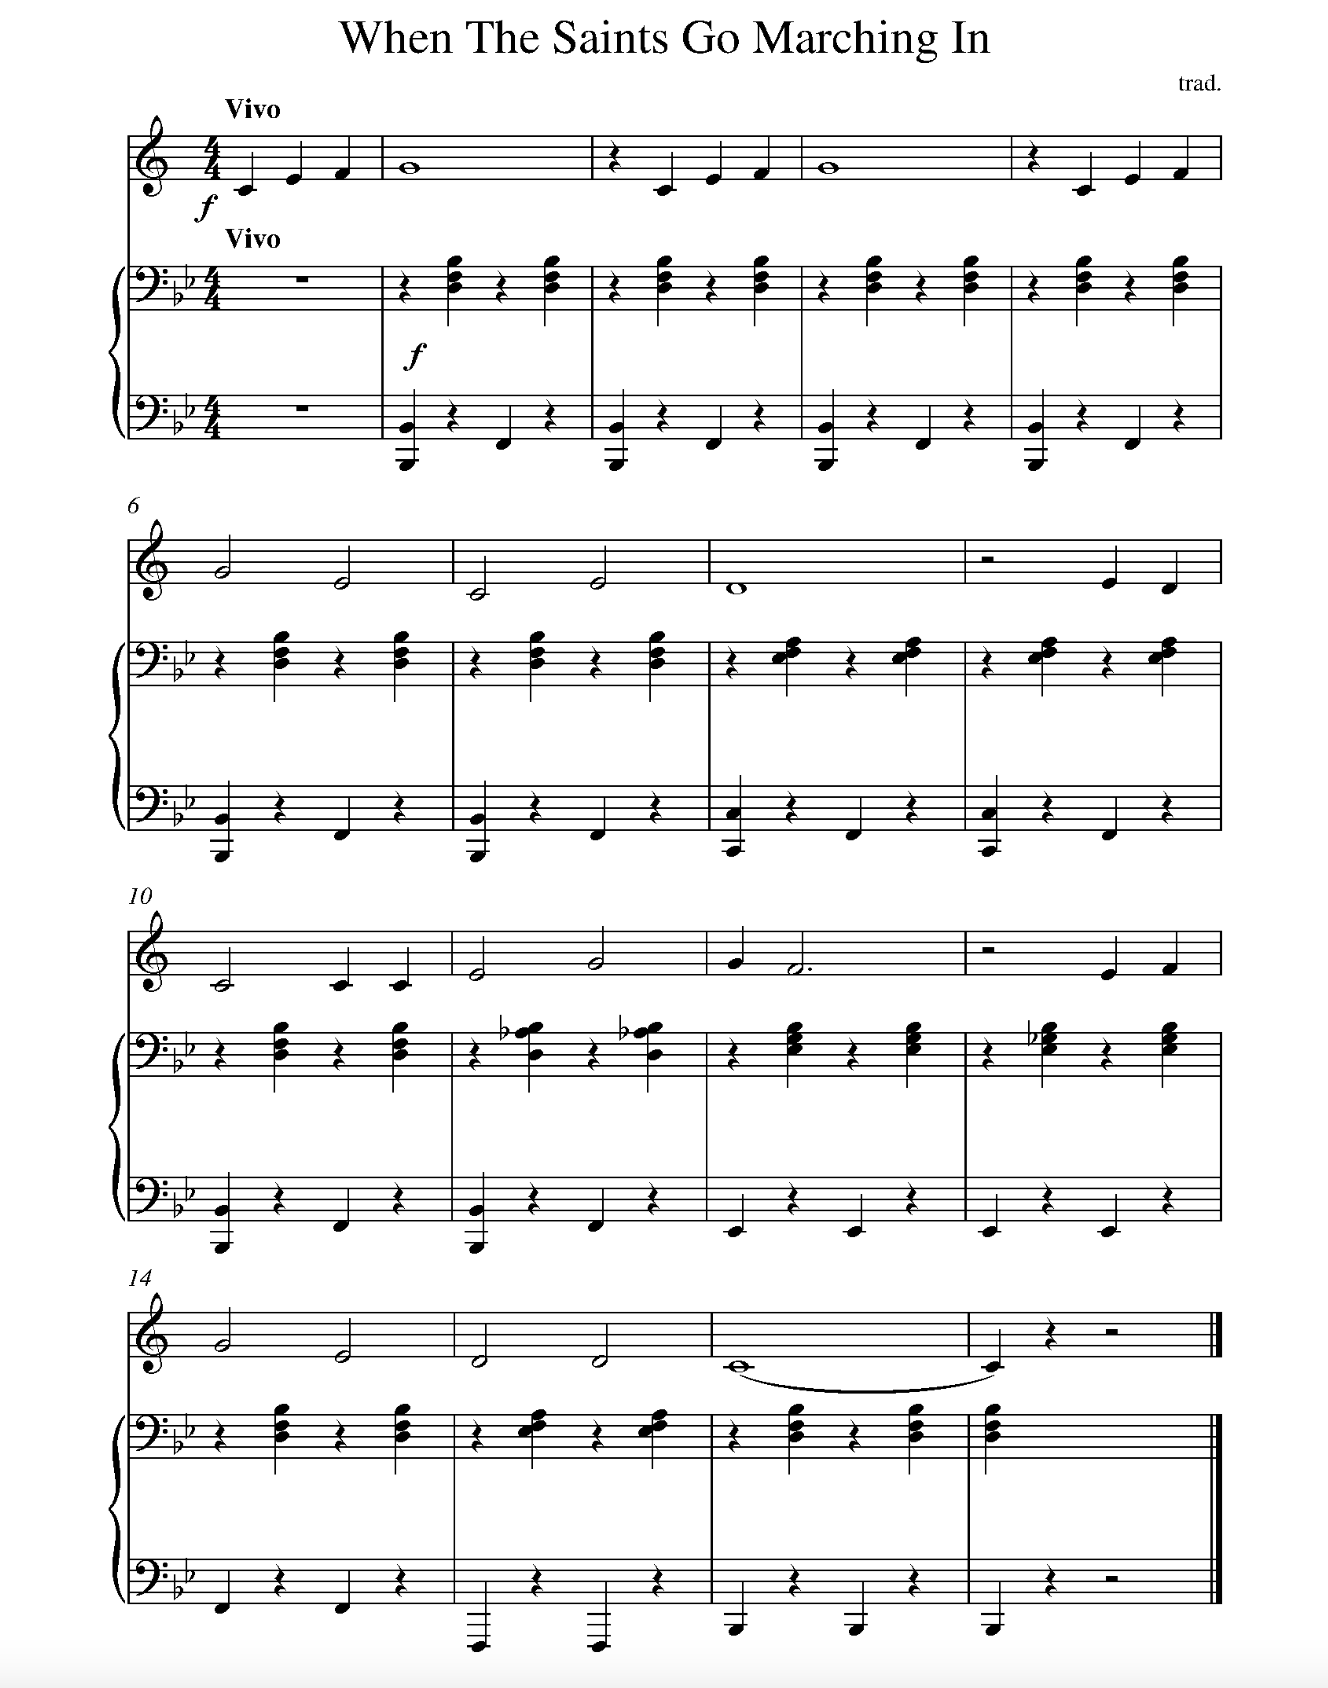 When the Saints Go Marching In clarinet sheet music